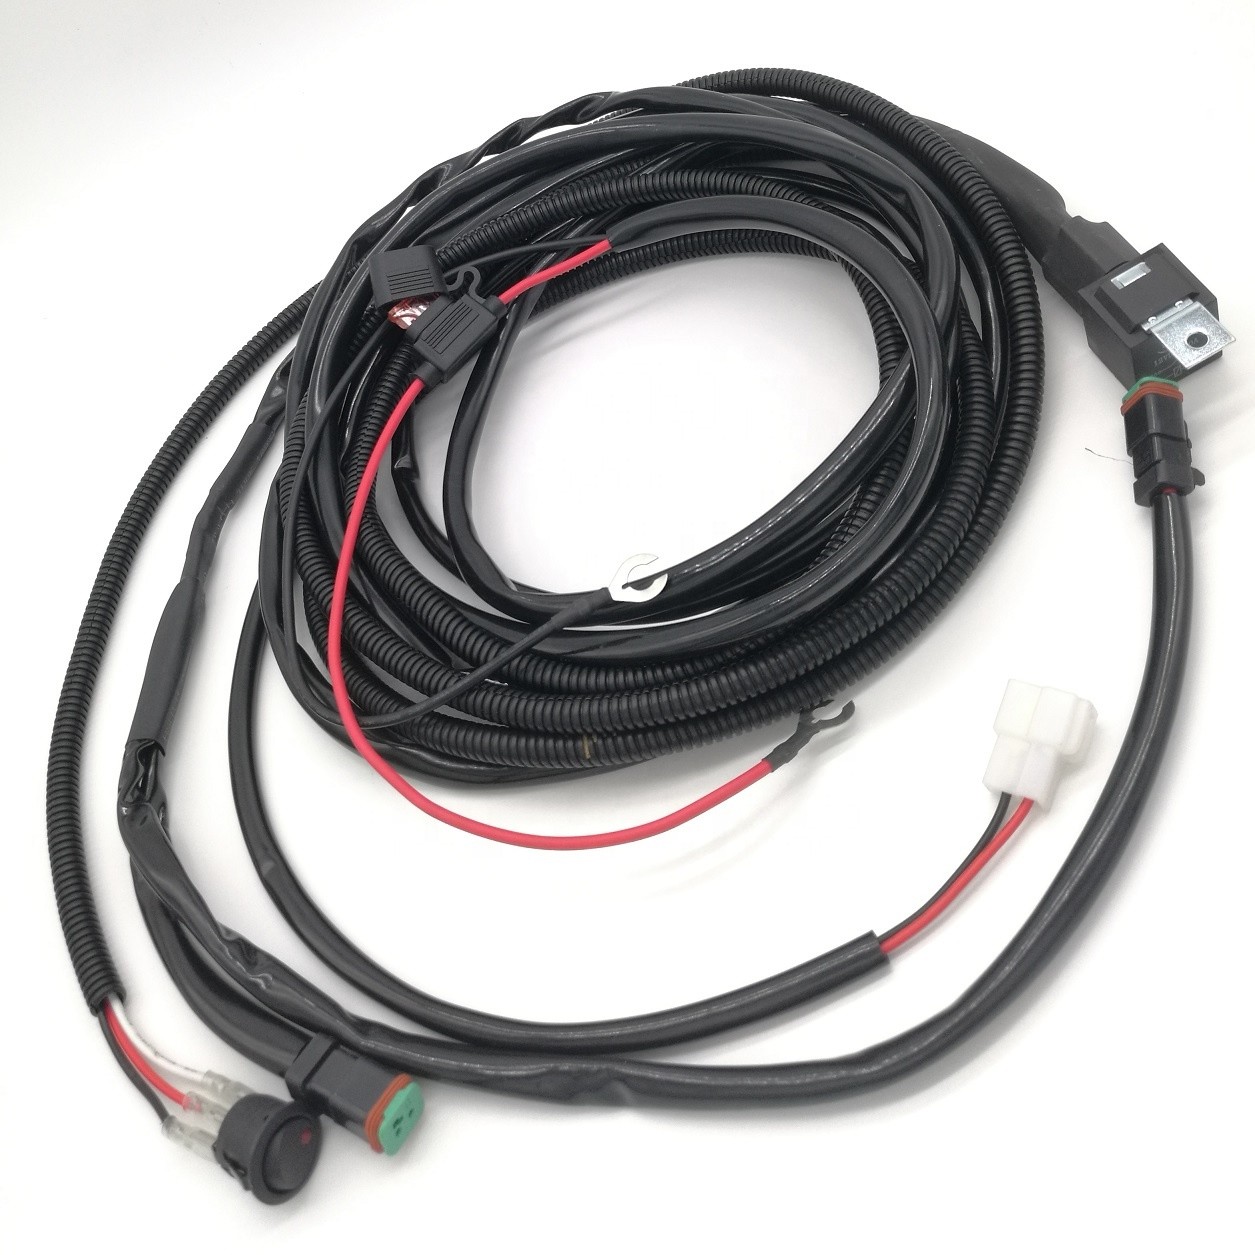 Chentong Cable Top-rated Auto LED Fog Light Relay Wire Harness With Switch And Relay